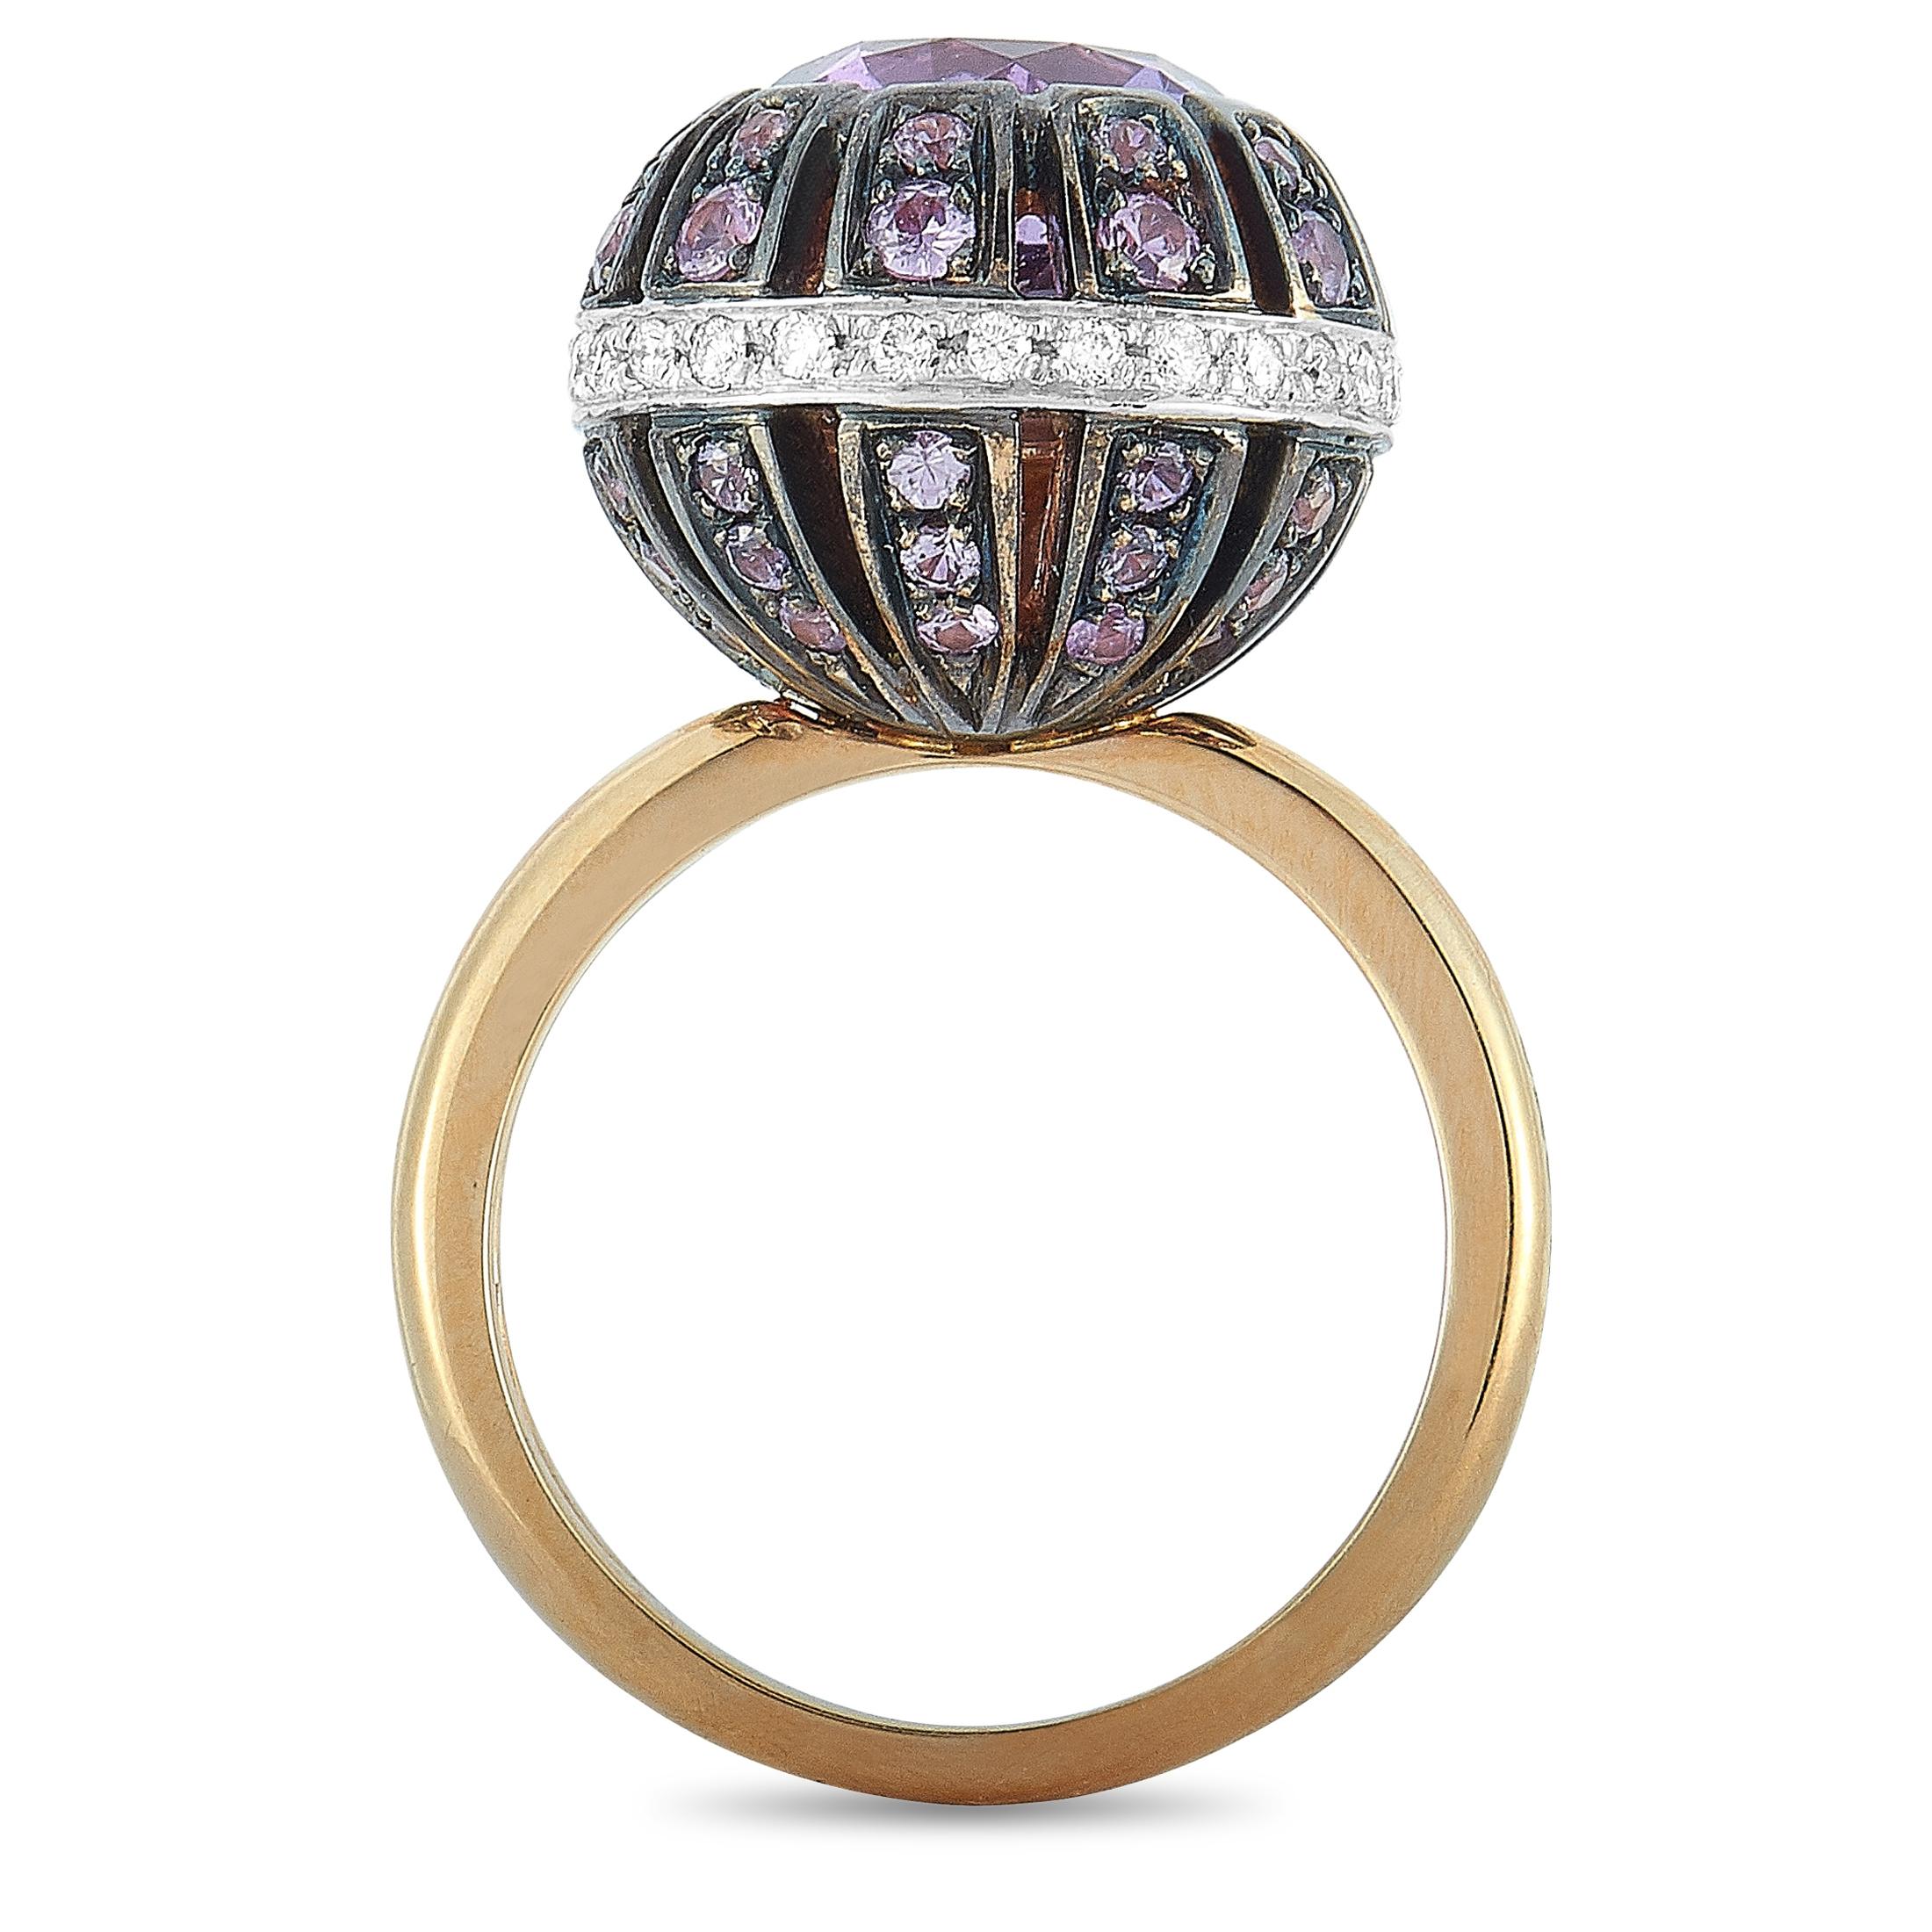 This Oro Trend ring is crafted from 18K rose gold and set with an amethyst, a total of 0.22 carats of diamonds, and 1.09 carats of purple sapphires. The ring weighs 11.6 grams and boasts band thickness of 4 mm and top height of 13 mm, while top